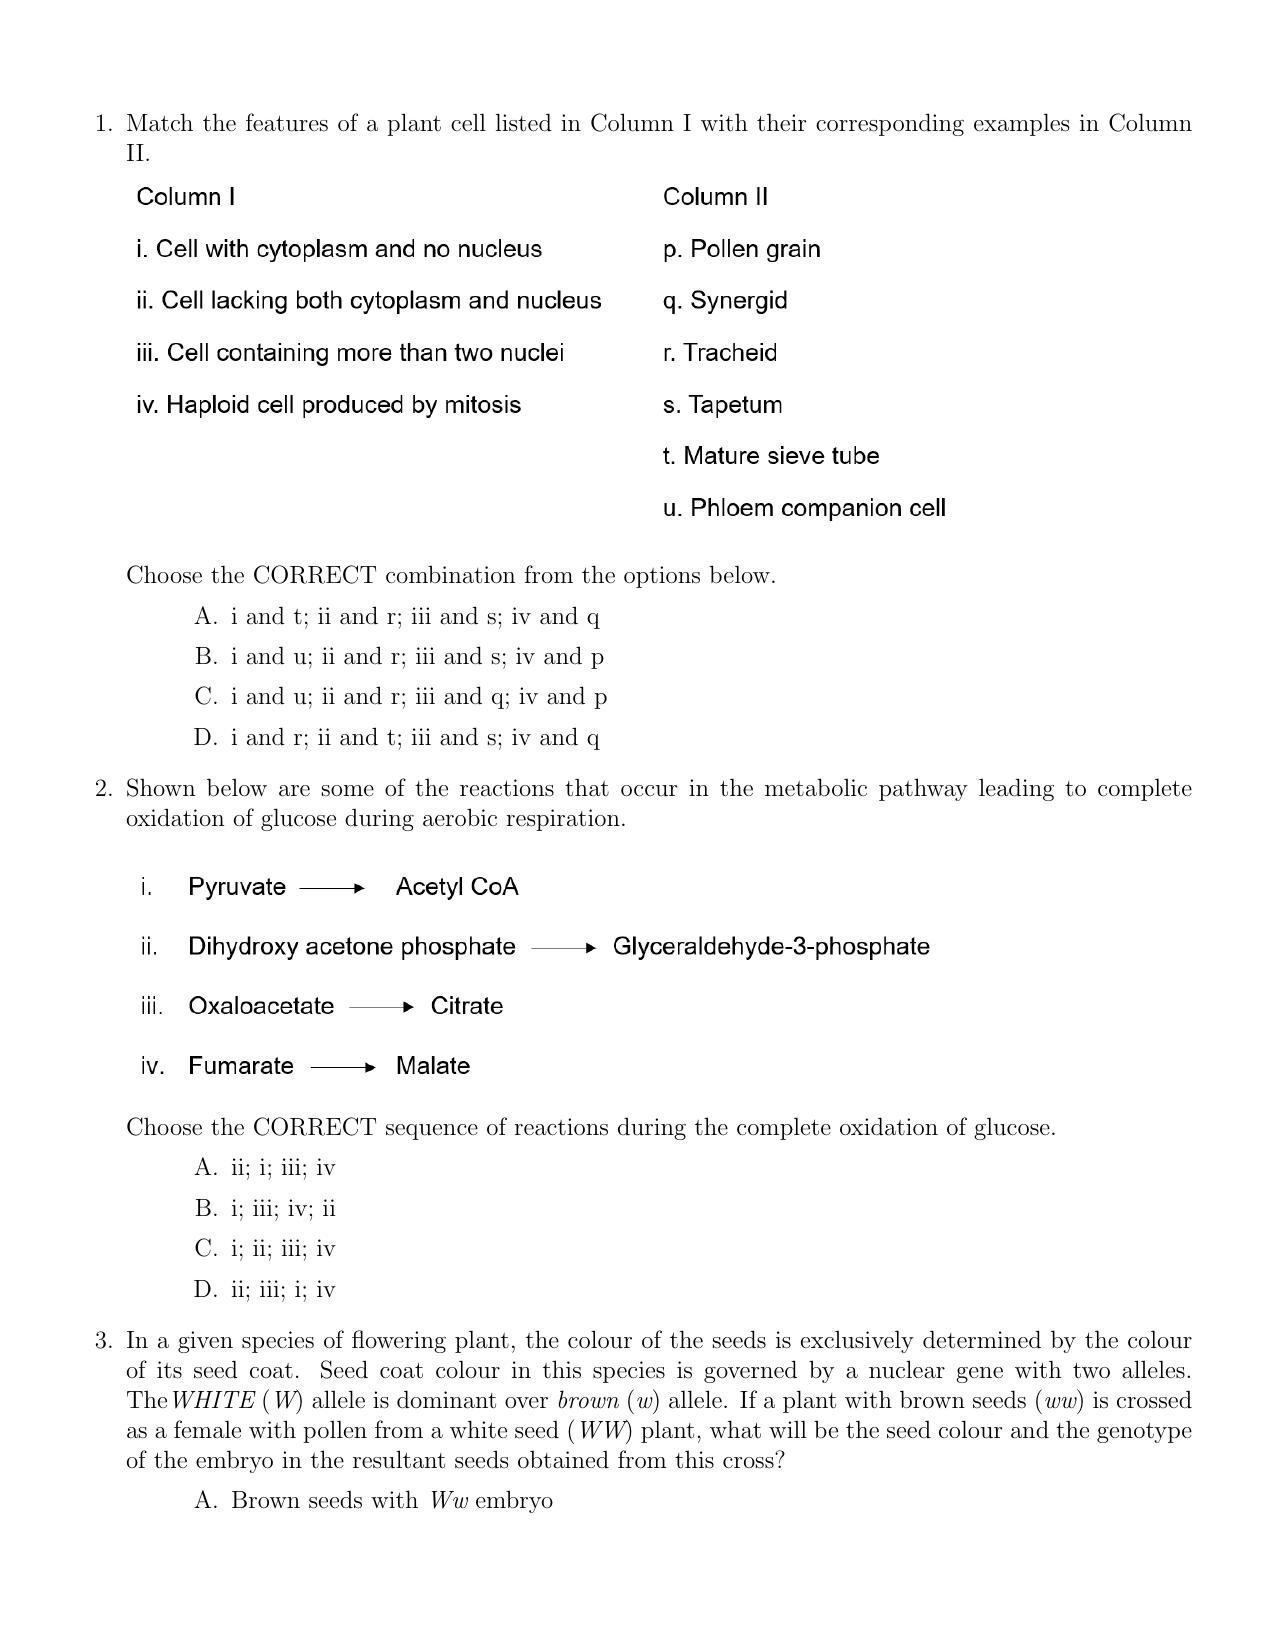 IISER Aptitude Test 2022 English Question Paper - Page 1